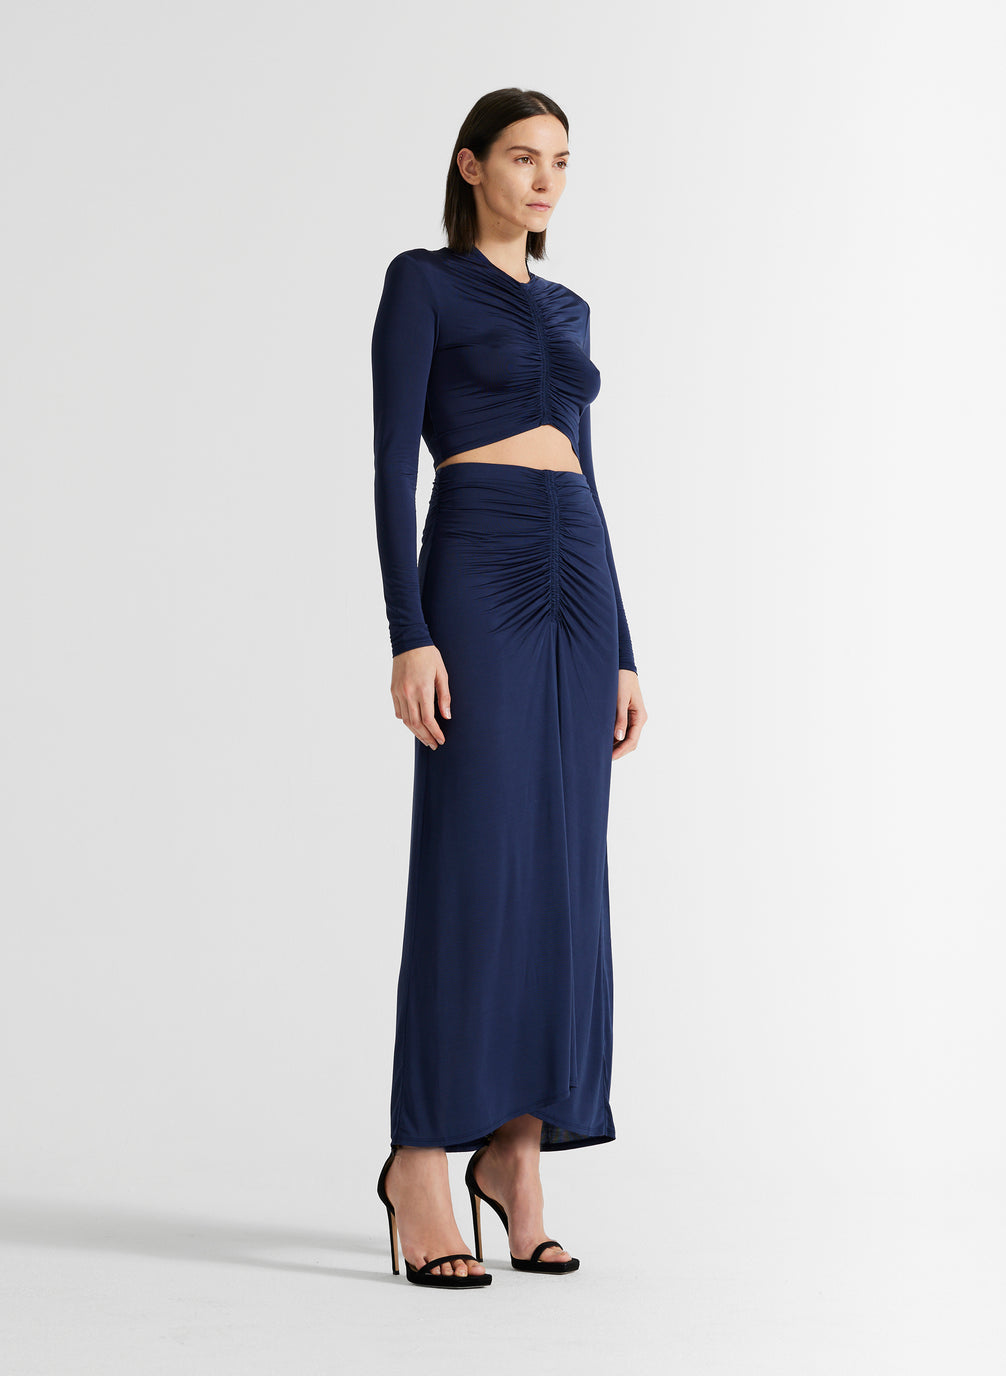 side view of woman wearing navy blue ruched long sleeve crop top and matching navy blue skirt